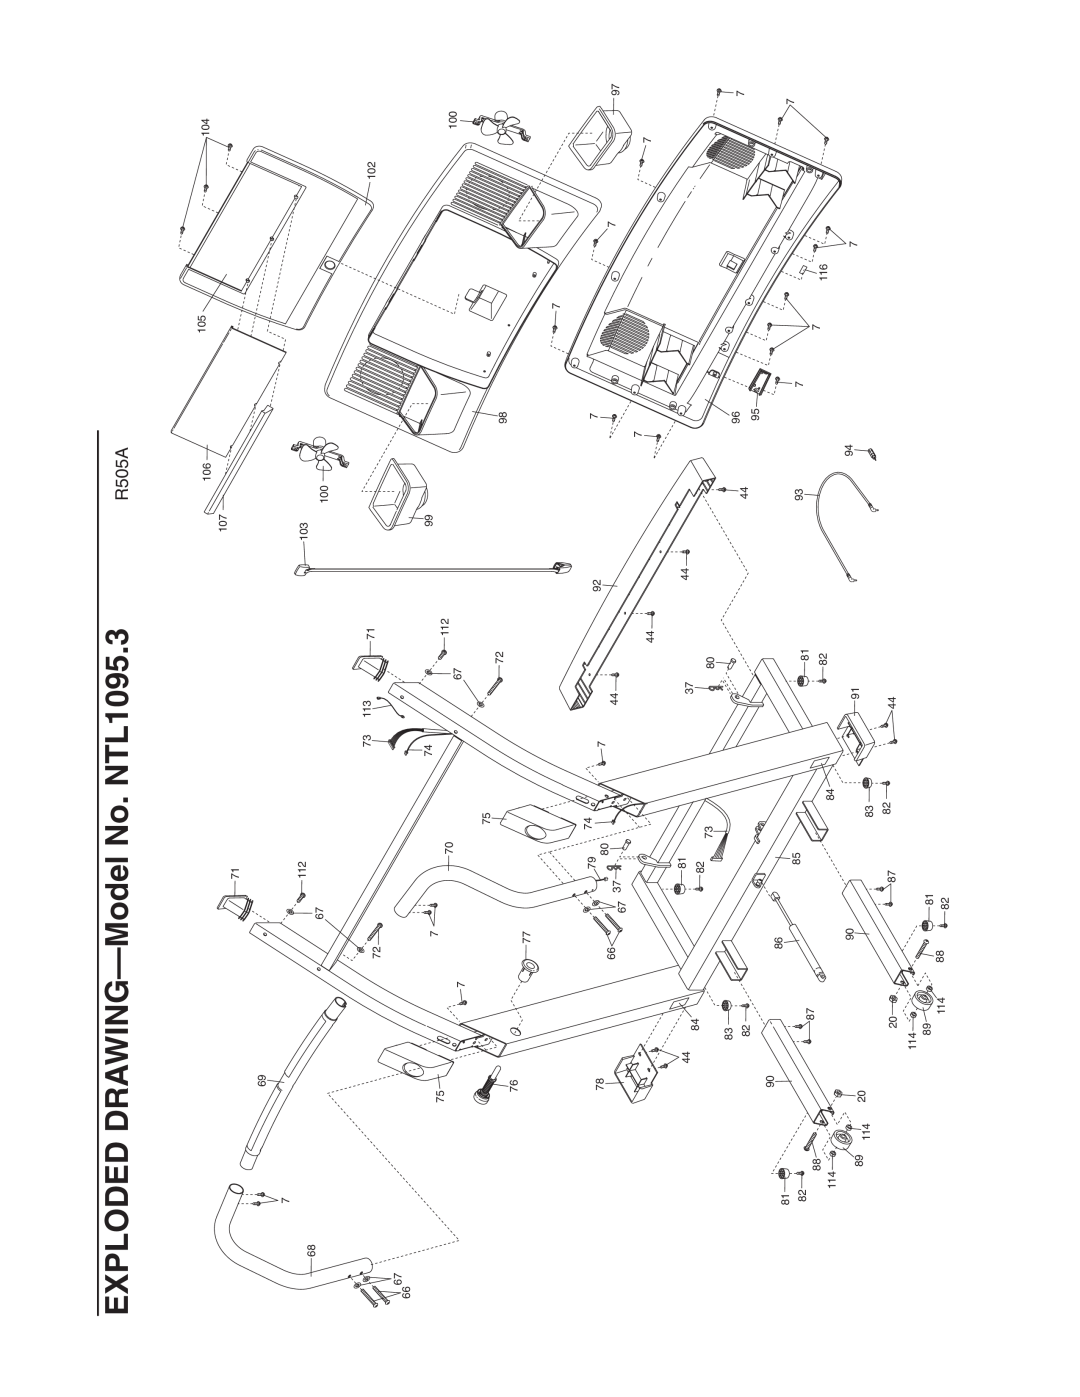 NordicTrack user manual EXPLODED DRAWING-Model No. NTL1095.3, R505A, 106105 107, 73 113 